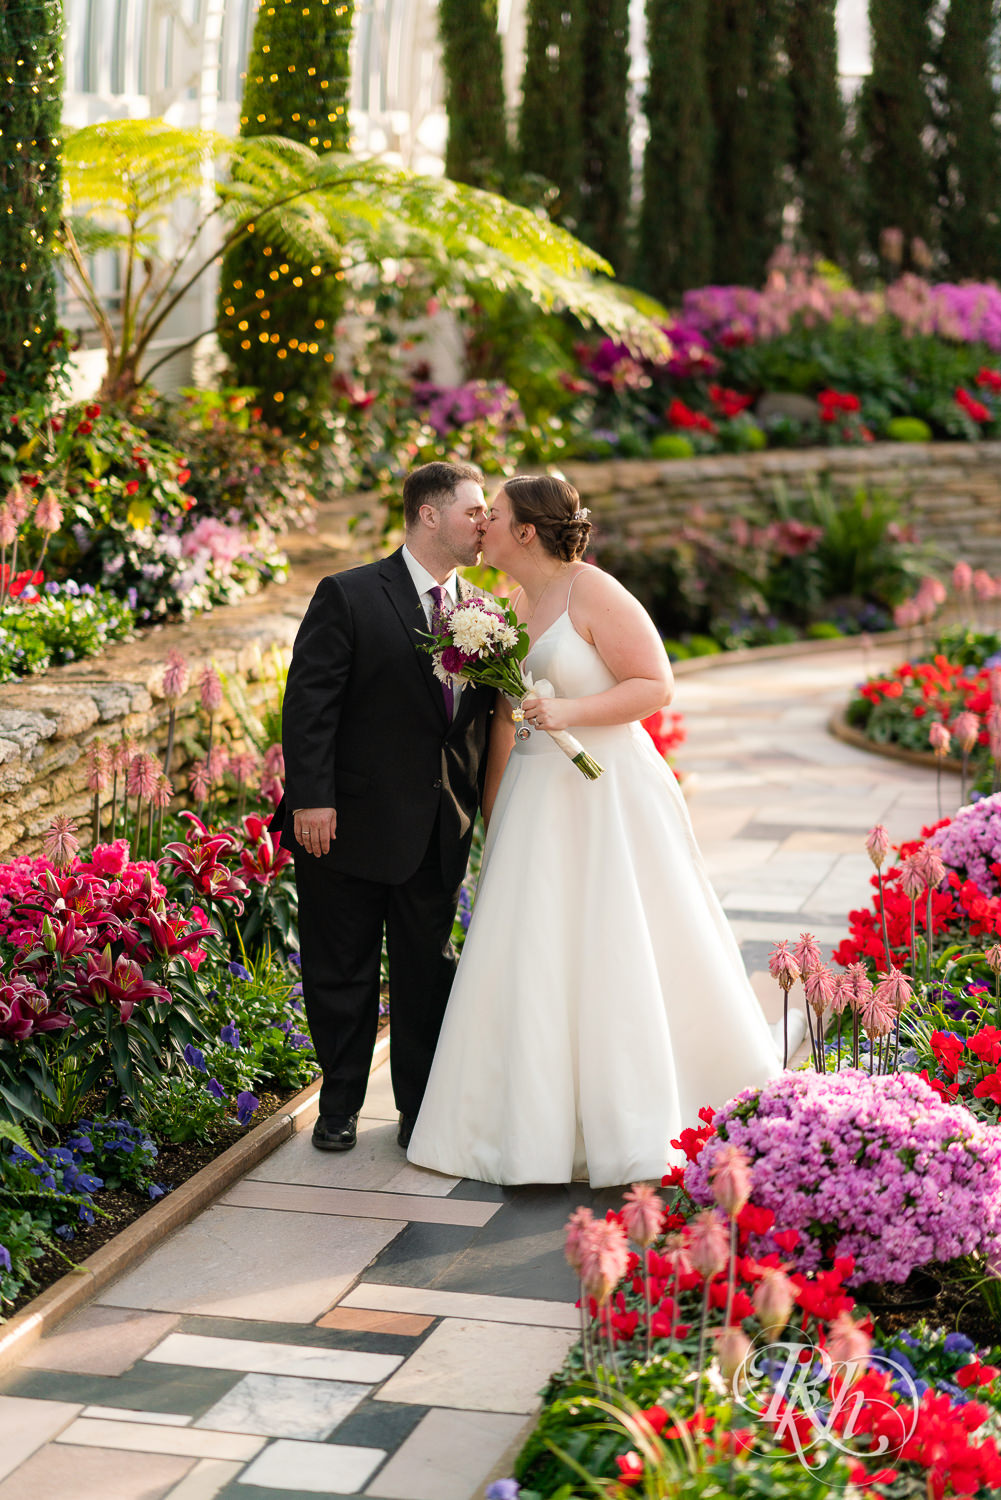 Bride and groom kissing among flowers at wedding at Como Zoo in Saint Paul, Minnesota.